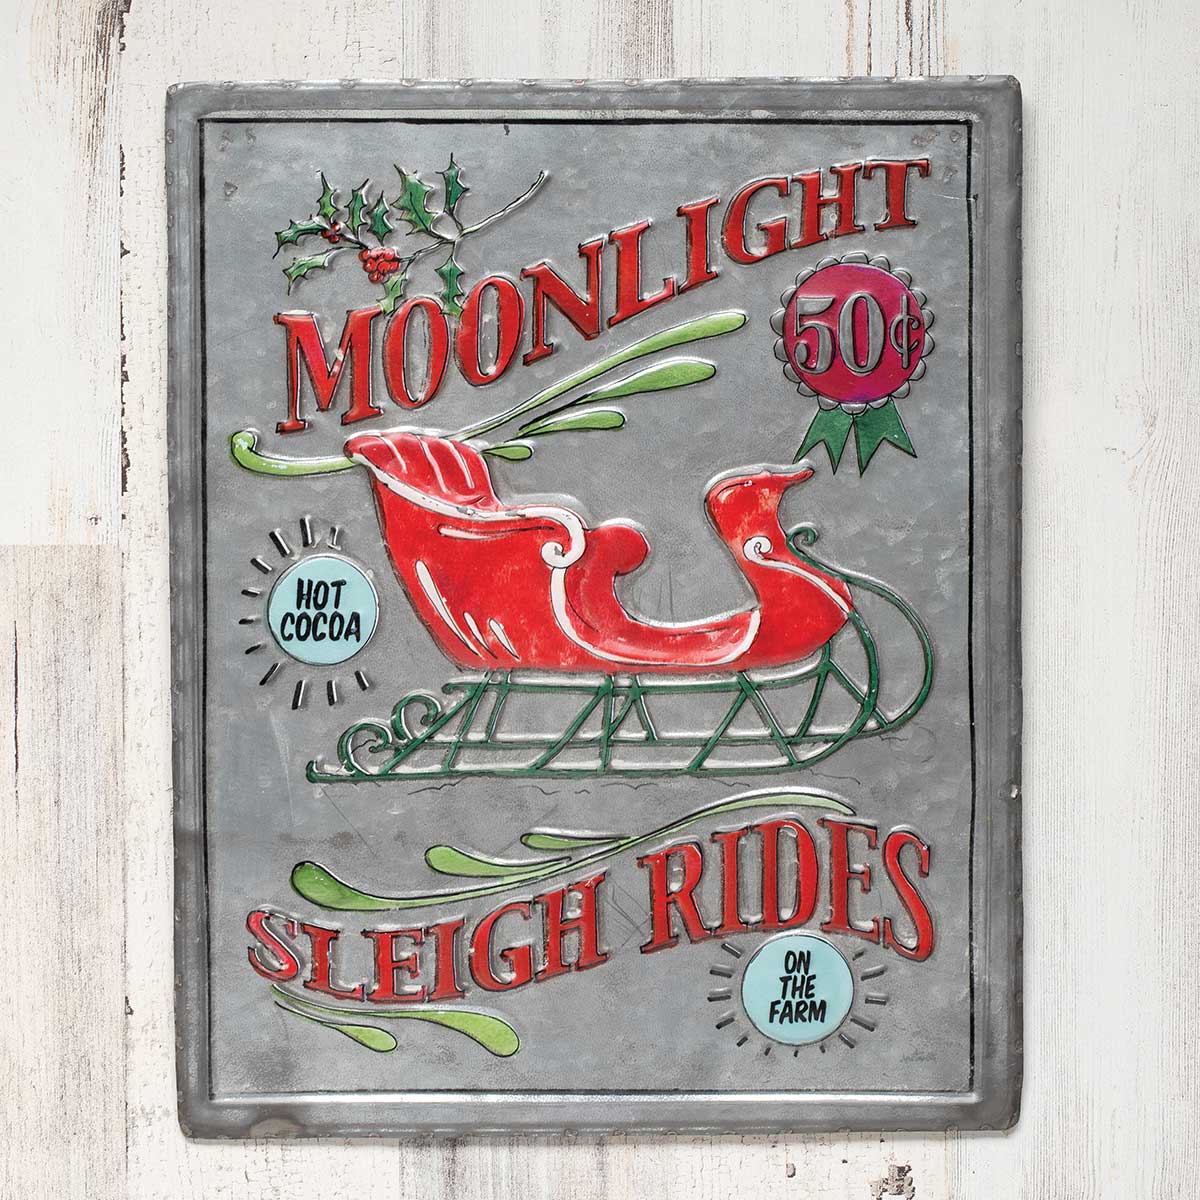 SIGN RECTANGLE SLEIGH RIDES 12.5IN X 15.75IN METAL